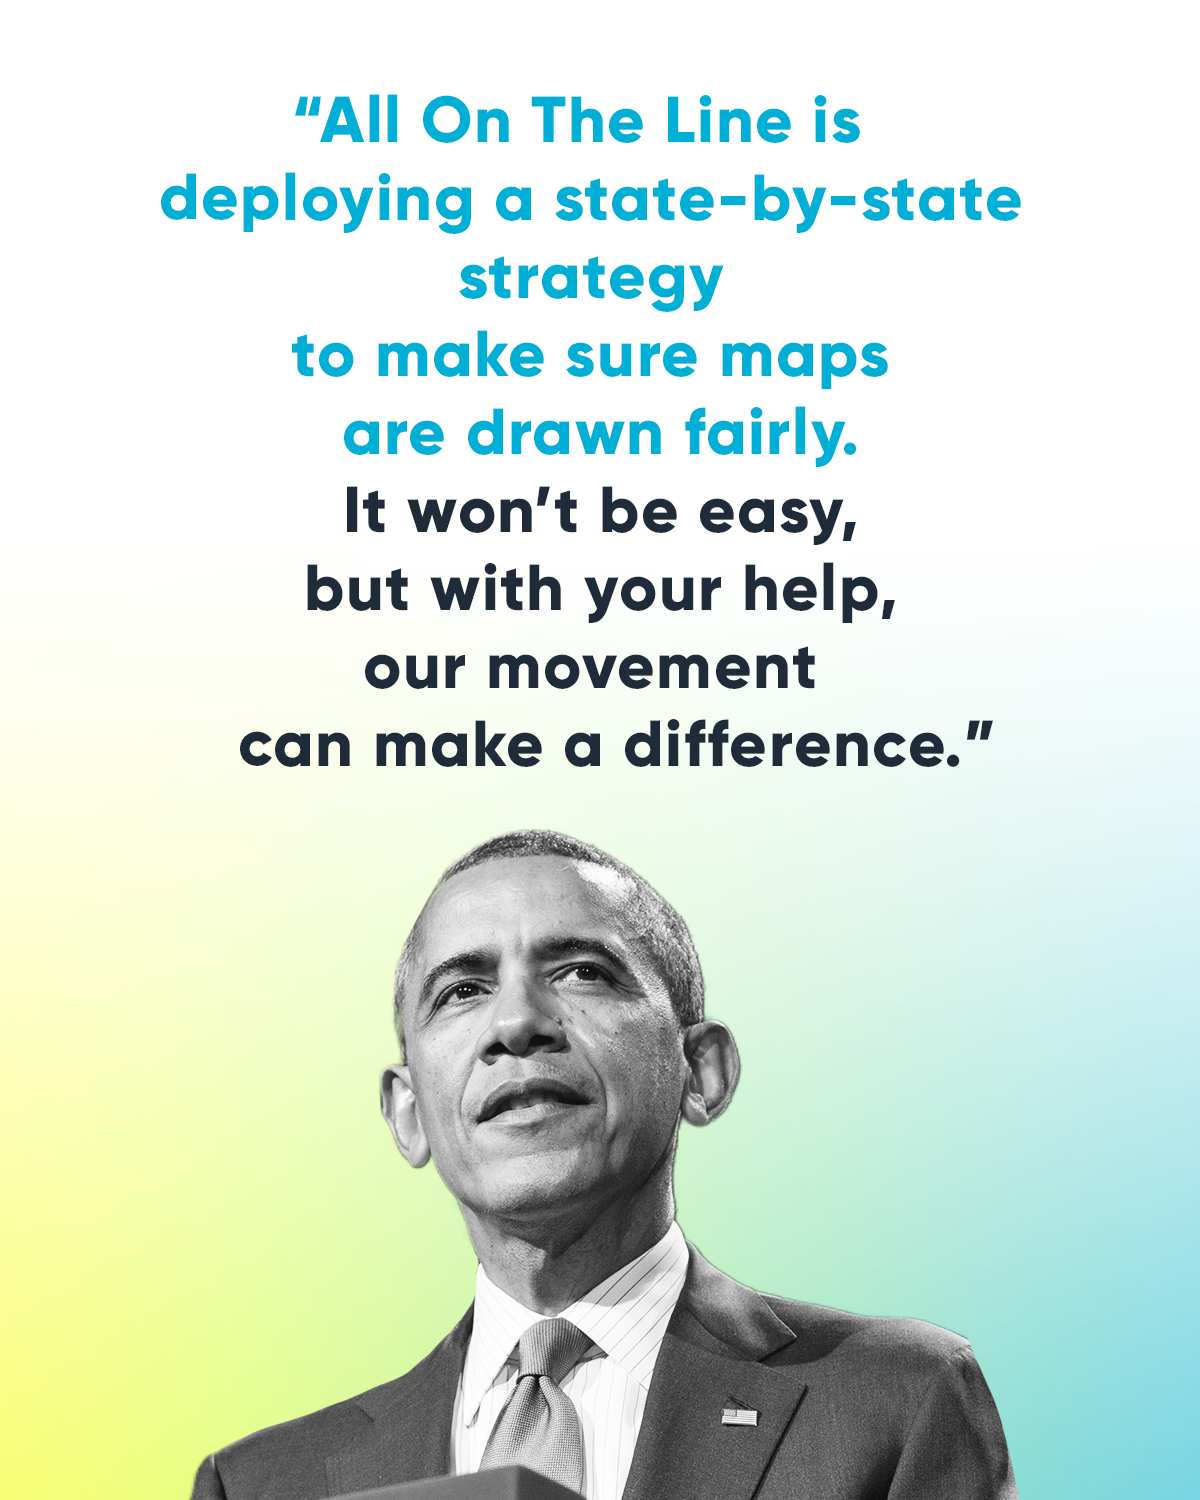 “All On The Line is deploying a state-by-state strategy to make sure maps are drawn fairly. It won’t be easy, but with your help, our movement can make a difference.” -- President Barack Obama